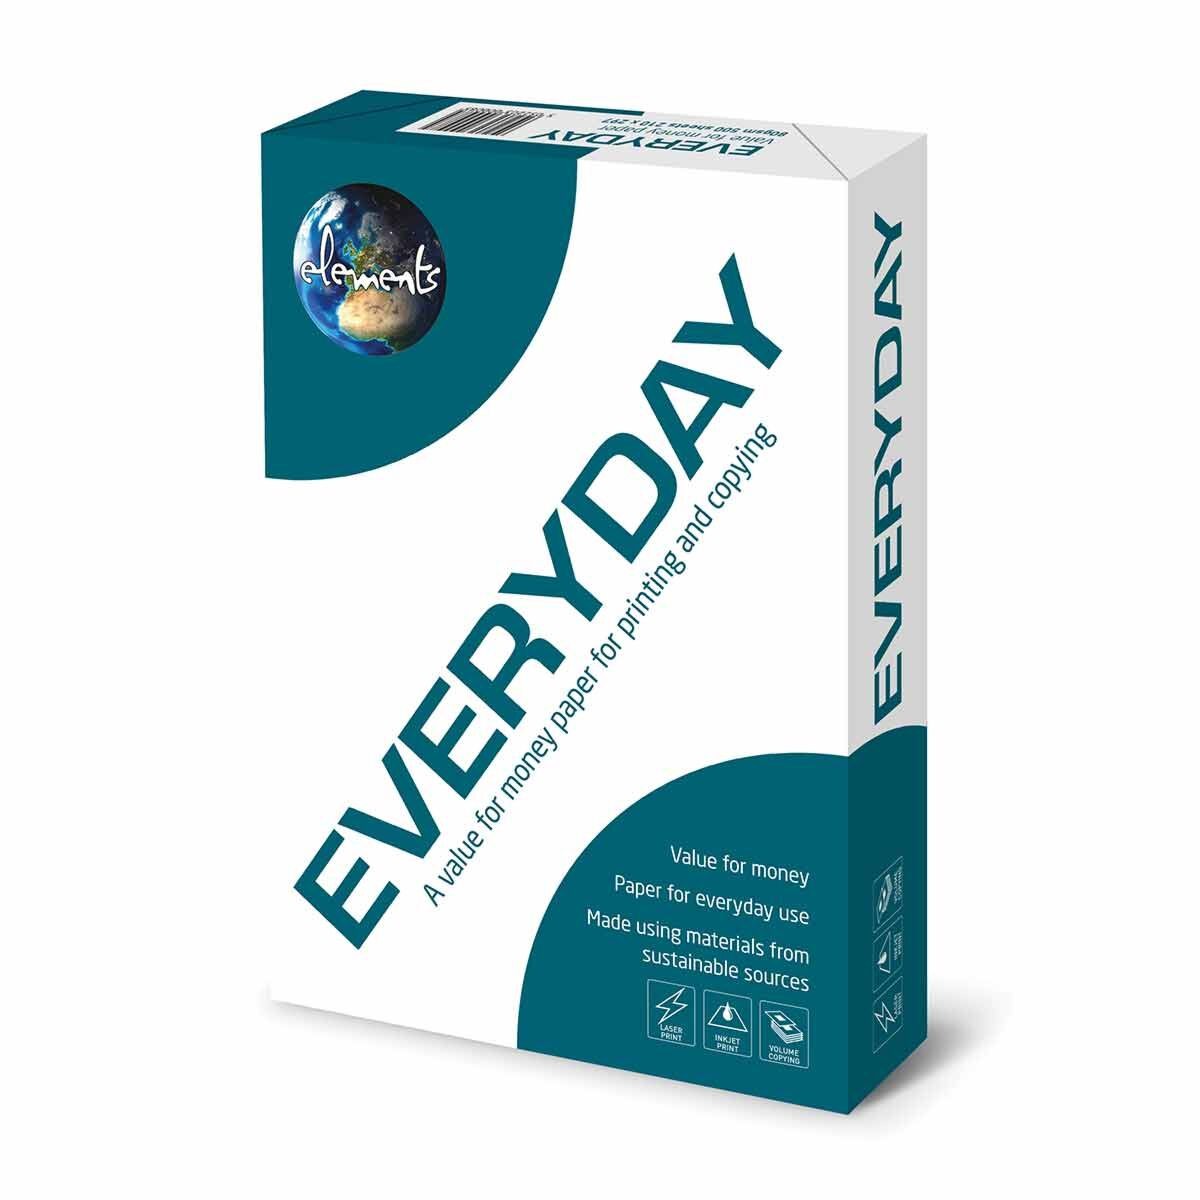 Elements+Everyday+A4+Paper+80gsm+Pack+of+2500+sheets